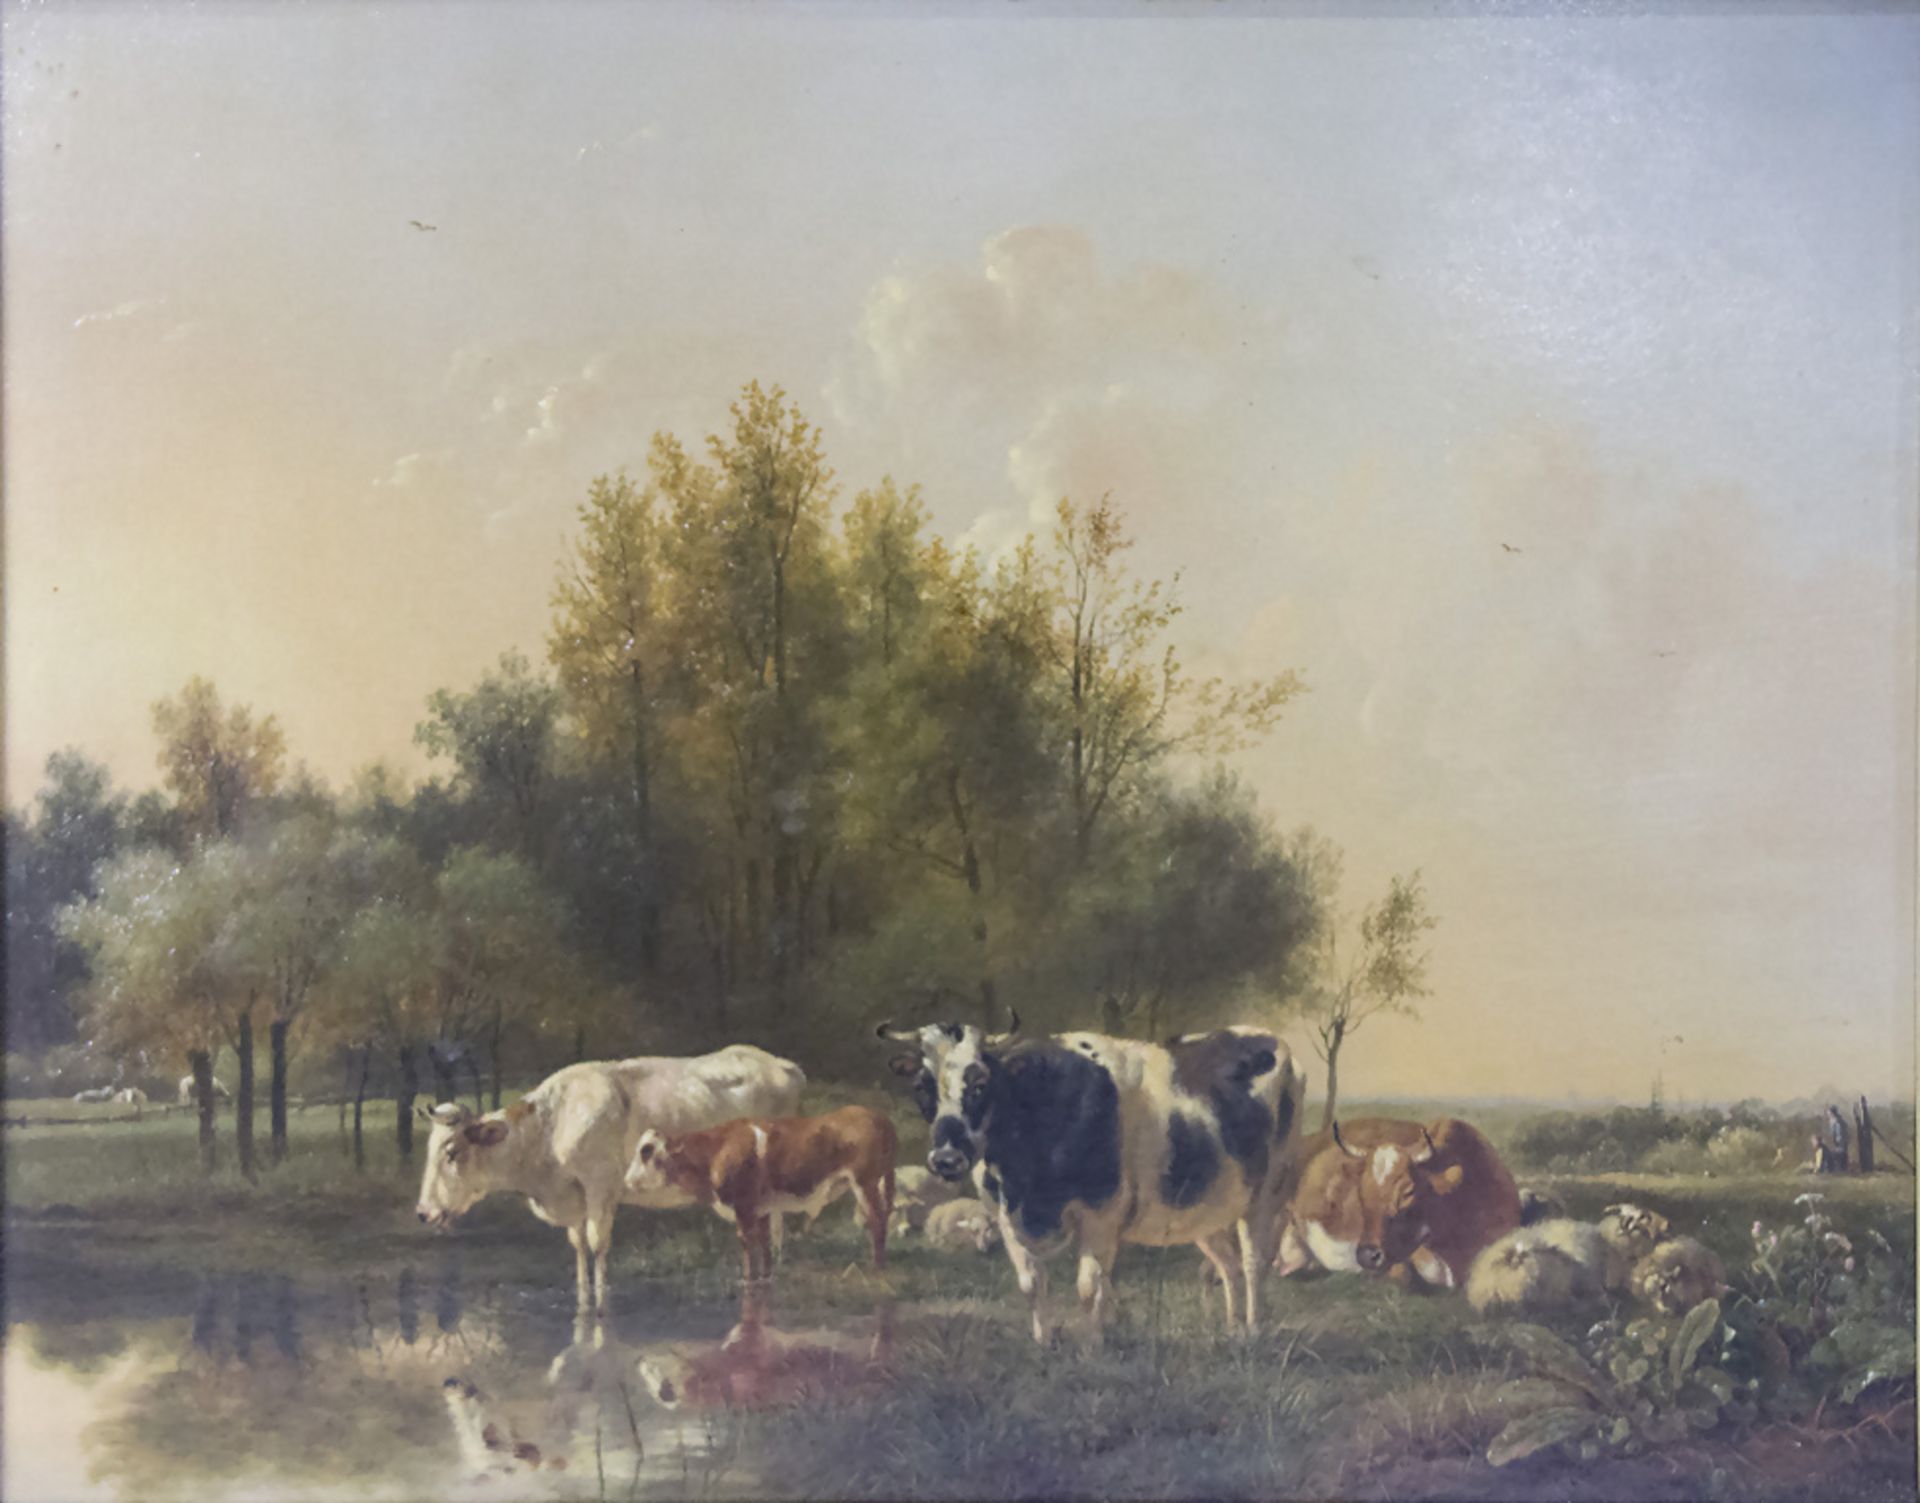 Pieter Frederick VAN OS (1808-1892), 'Kuhherde am Flußufer' / 'A herd of cows by a riverscape'